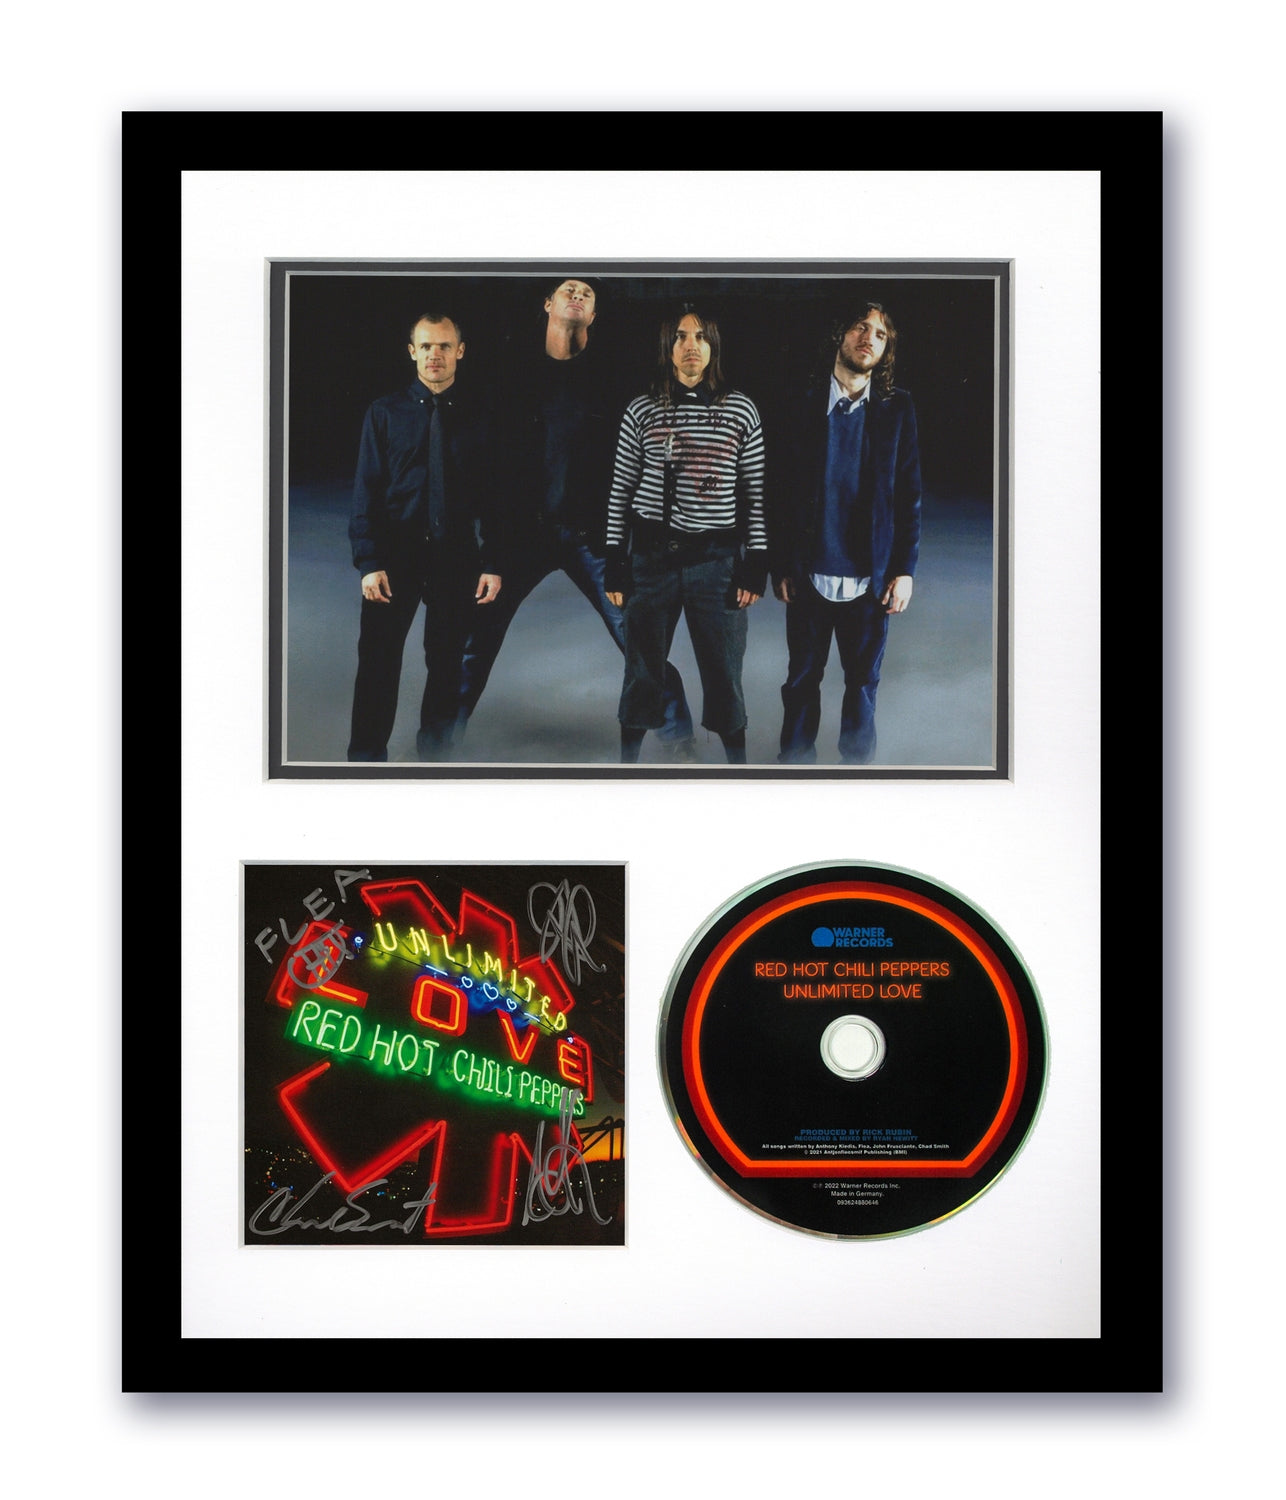 Red Hot Chili Peppers Signed 11x14 Framed CD Unlimited Love Autographed ACOA 2